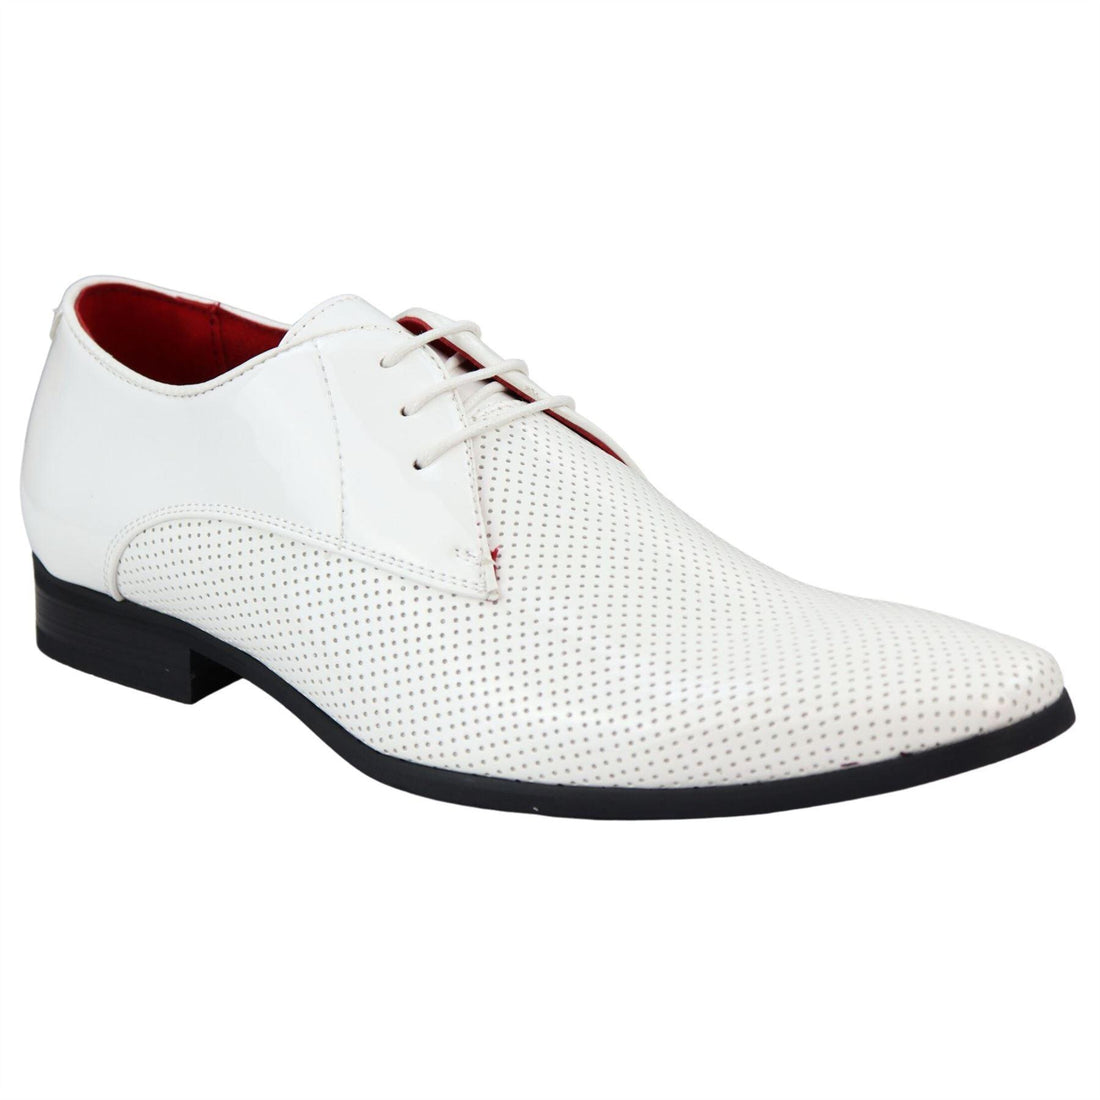 Mens Shoes Smart Formal Perforated Pointed Laced Black Red White Patent Leather PU - Knighthood Store